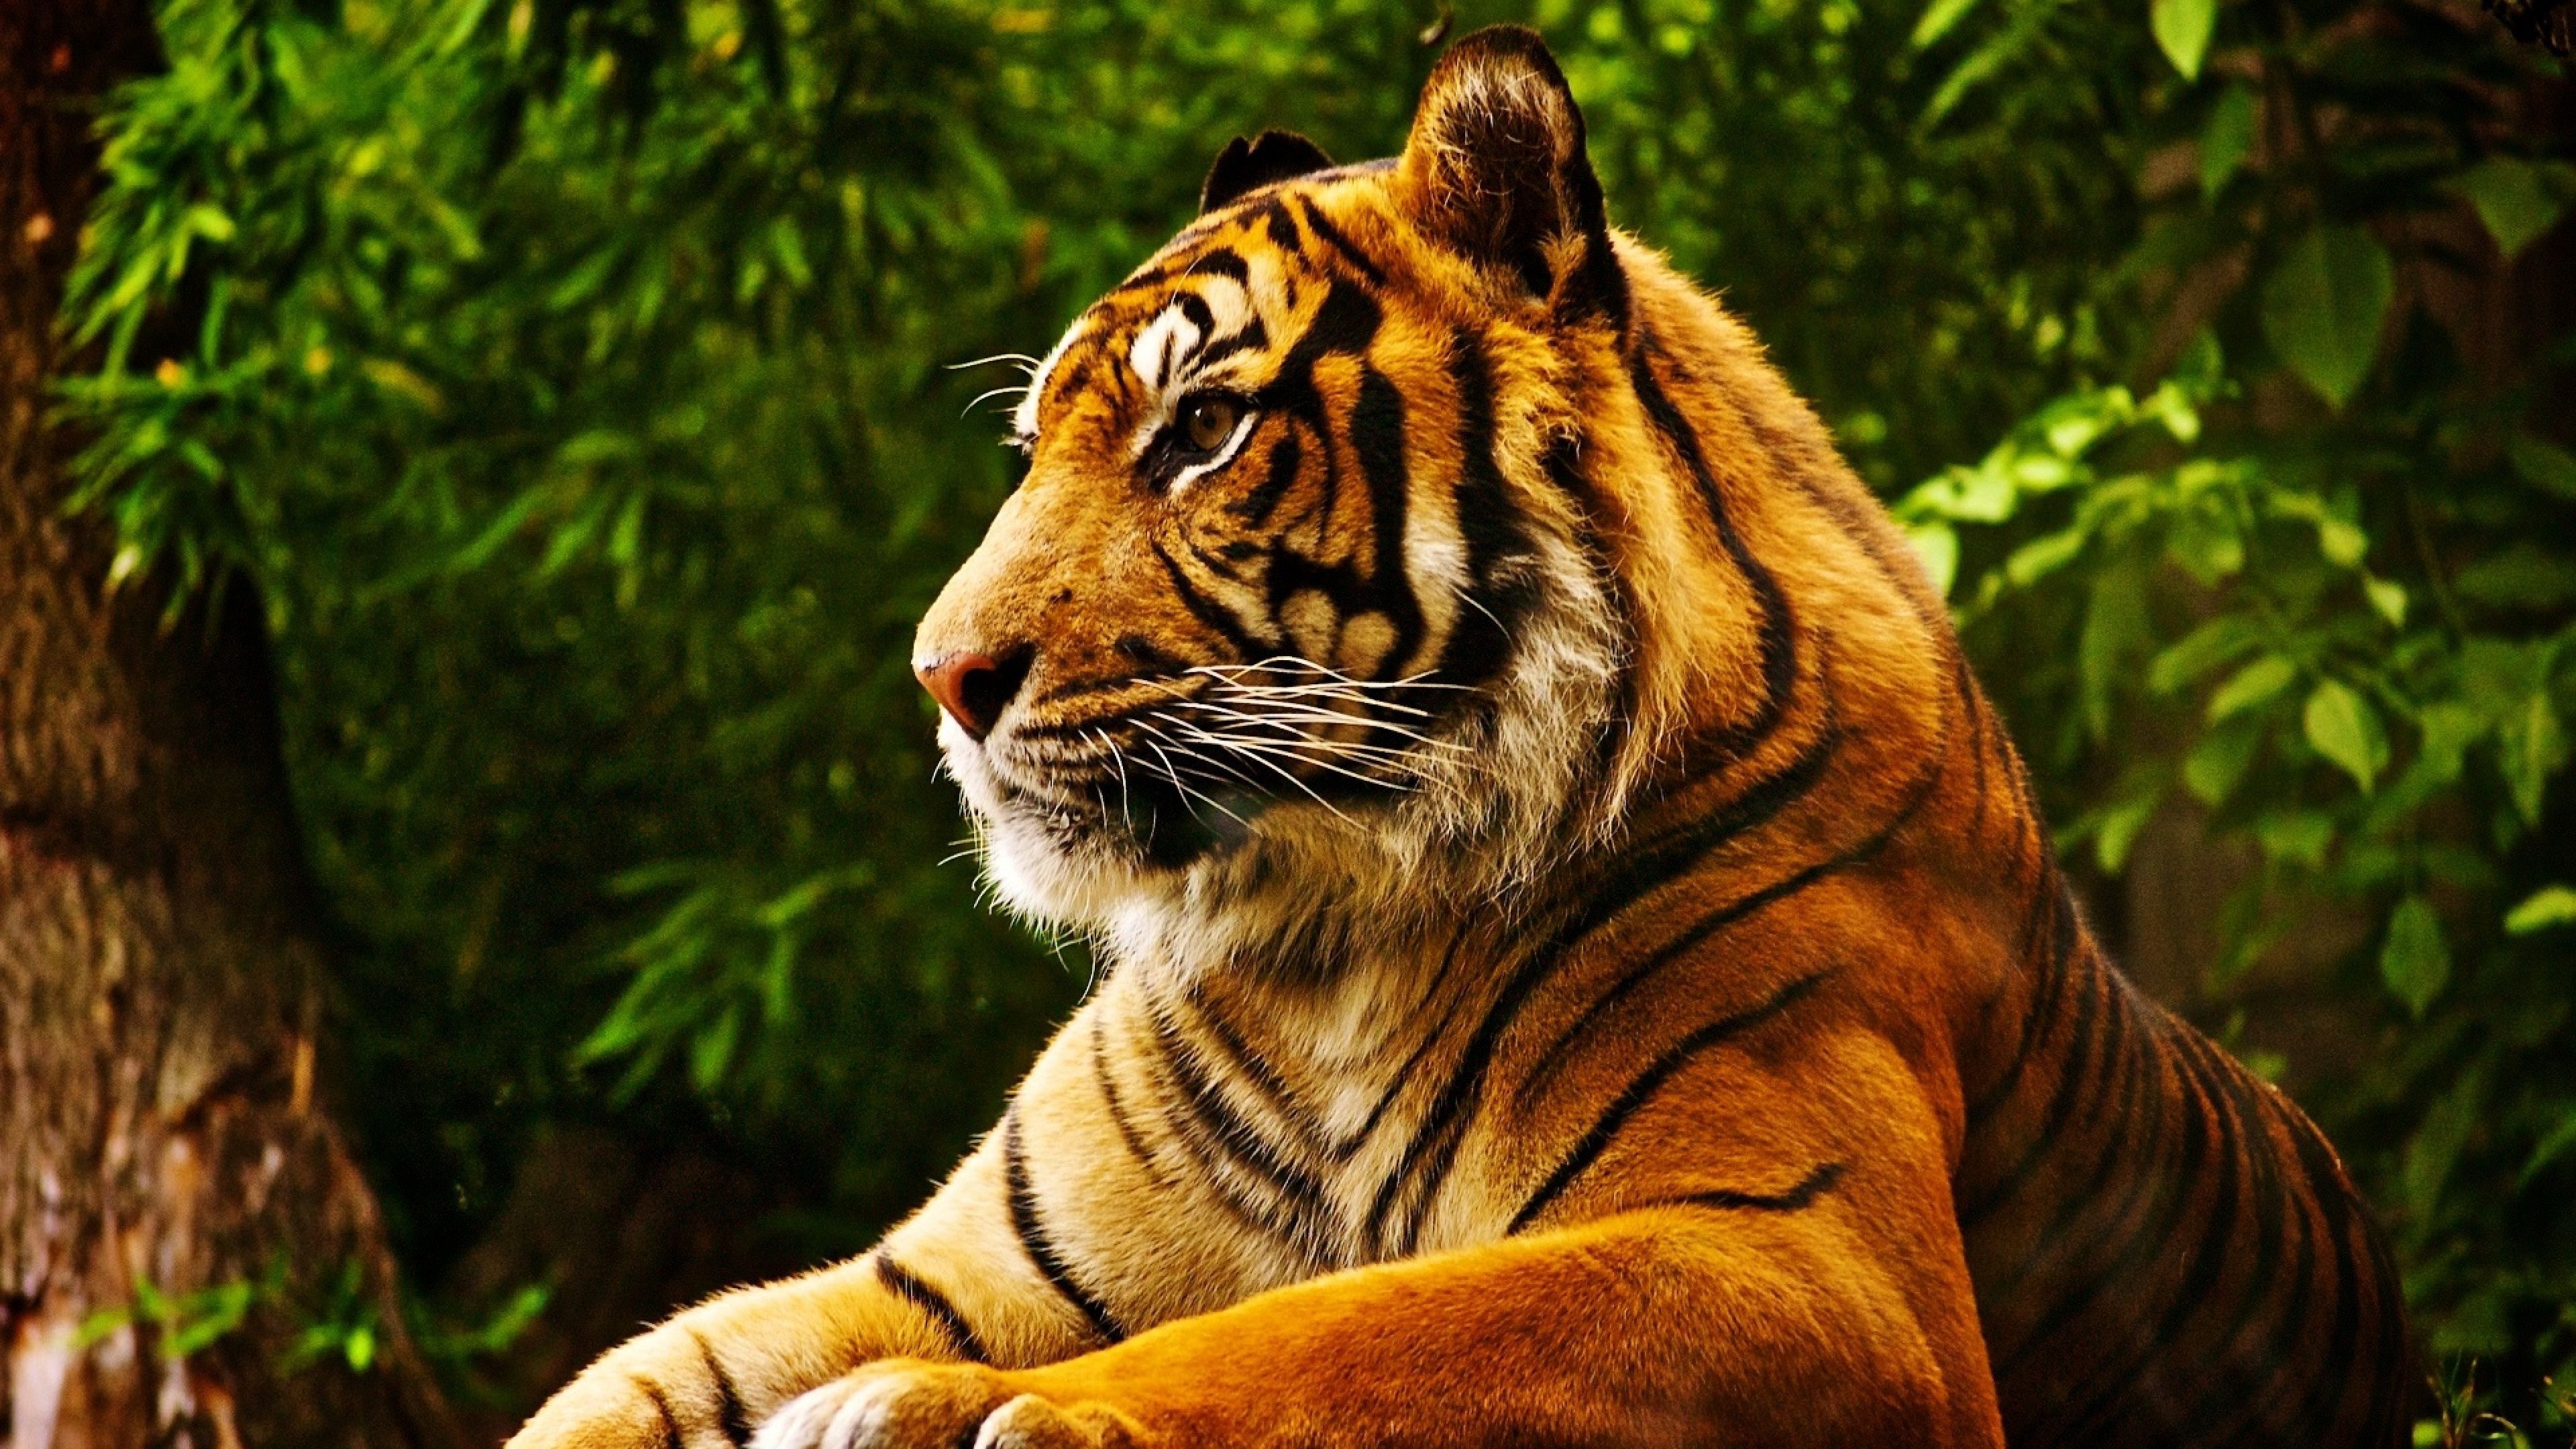 Tiger Staring Wallpapers | Wallpapers HD